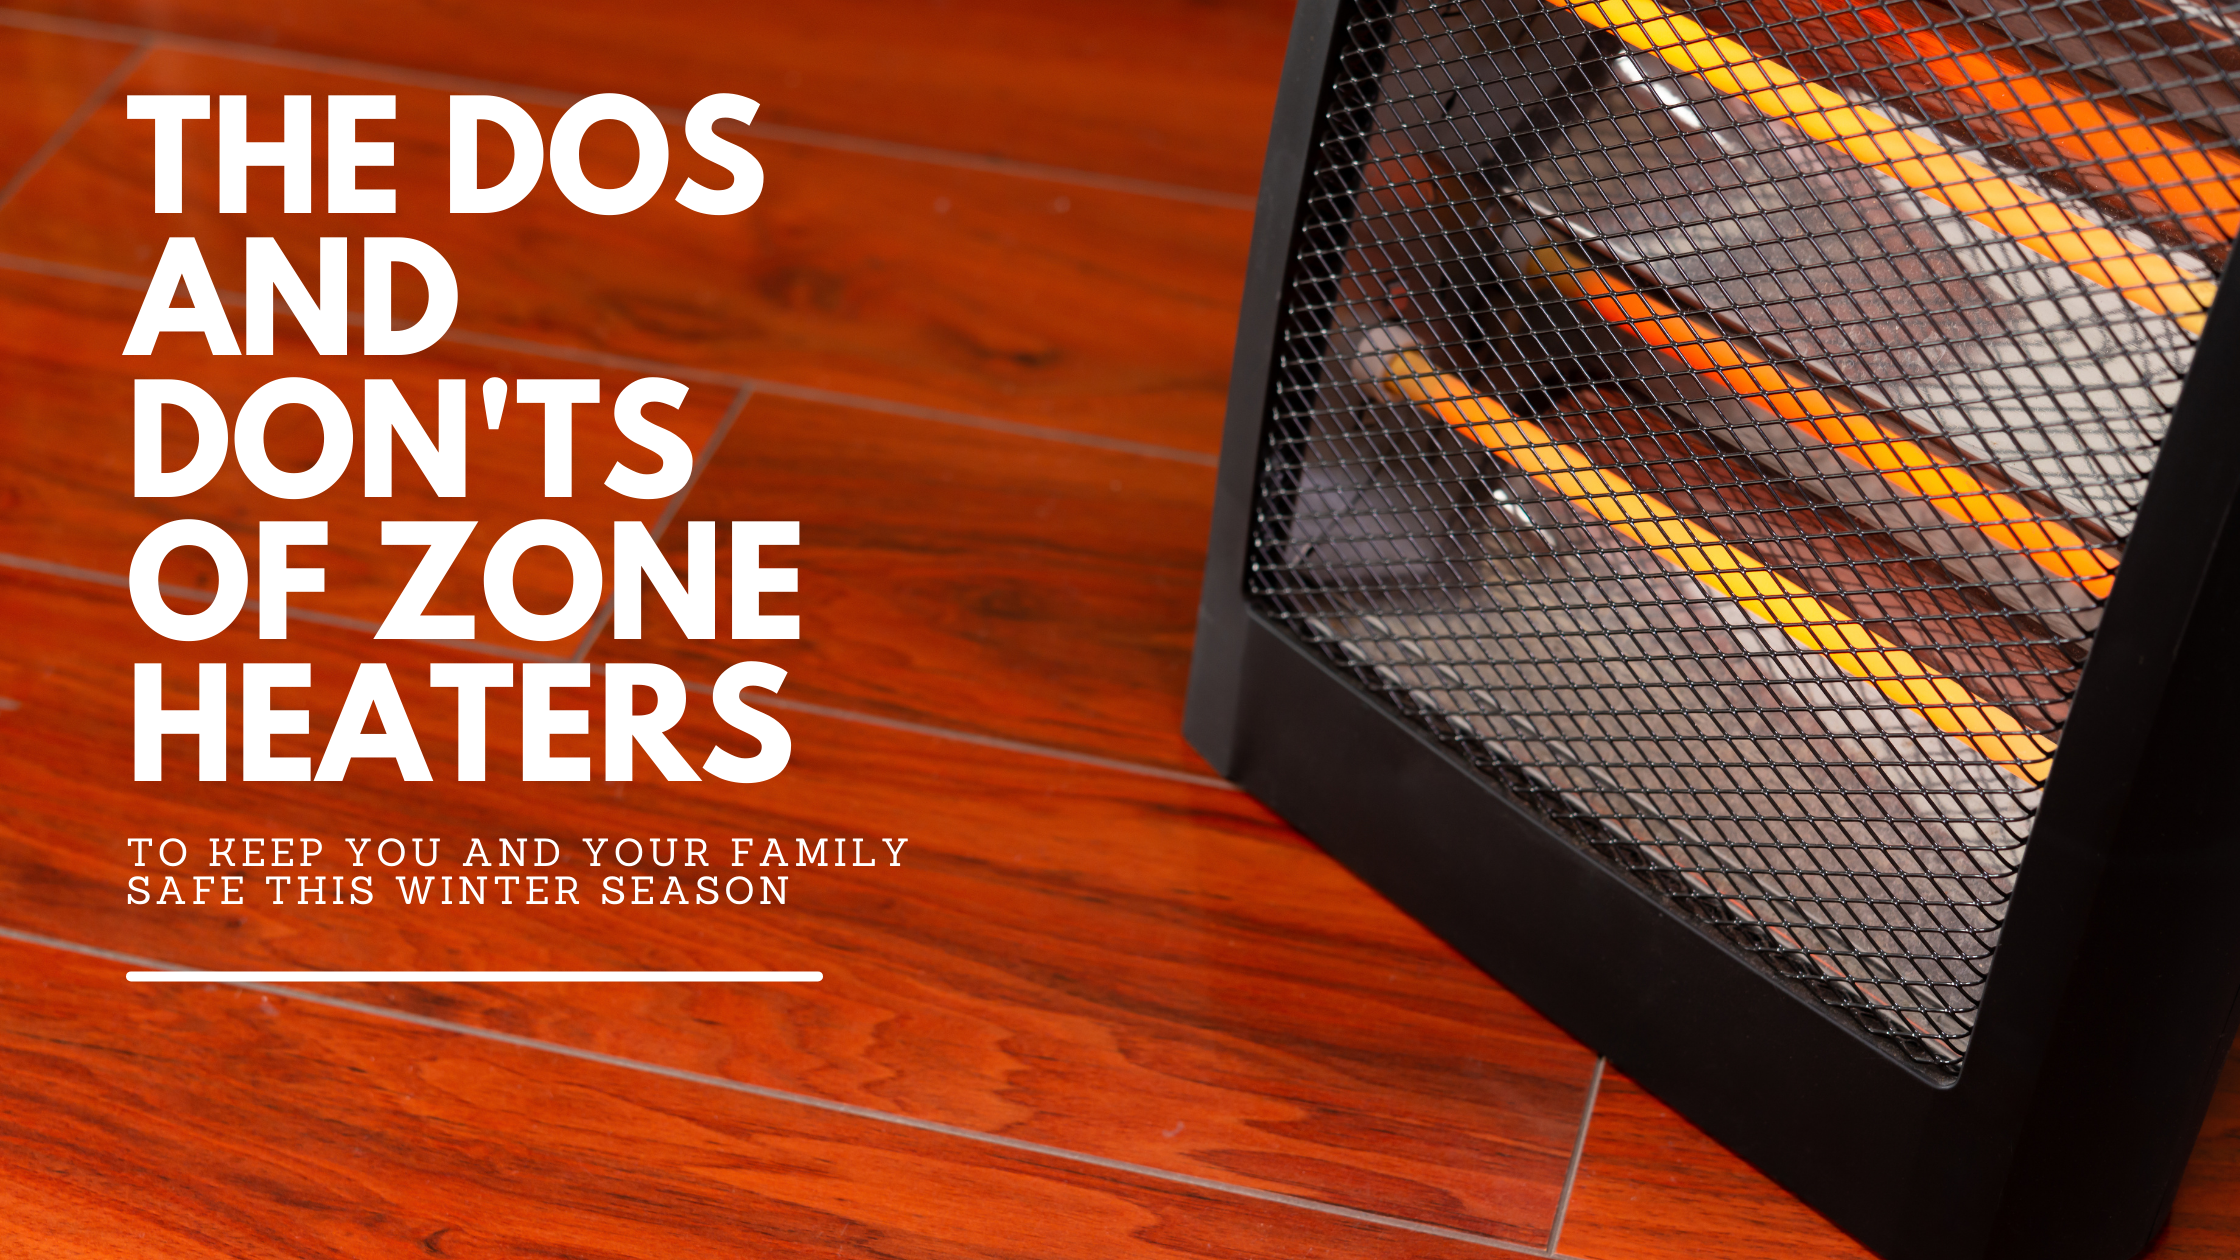 Dos and Don'ts of zone heaters